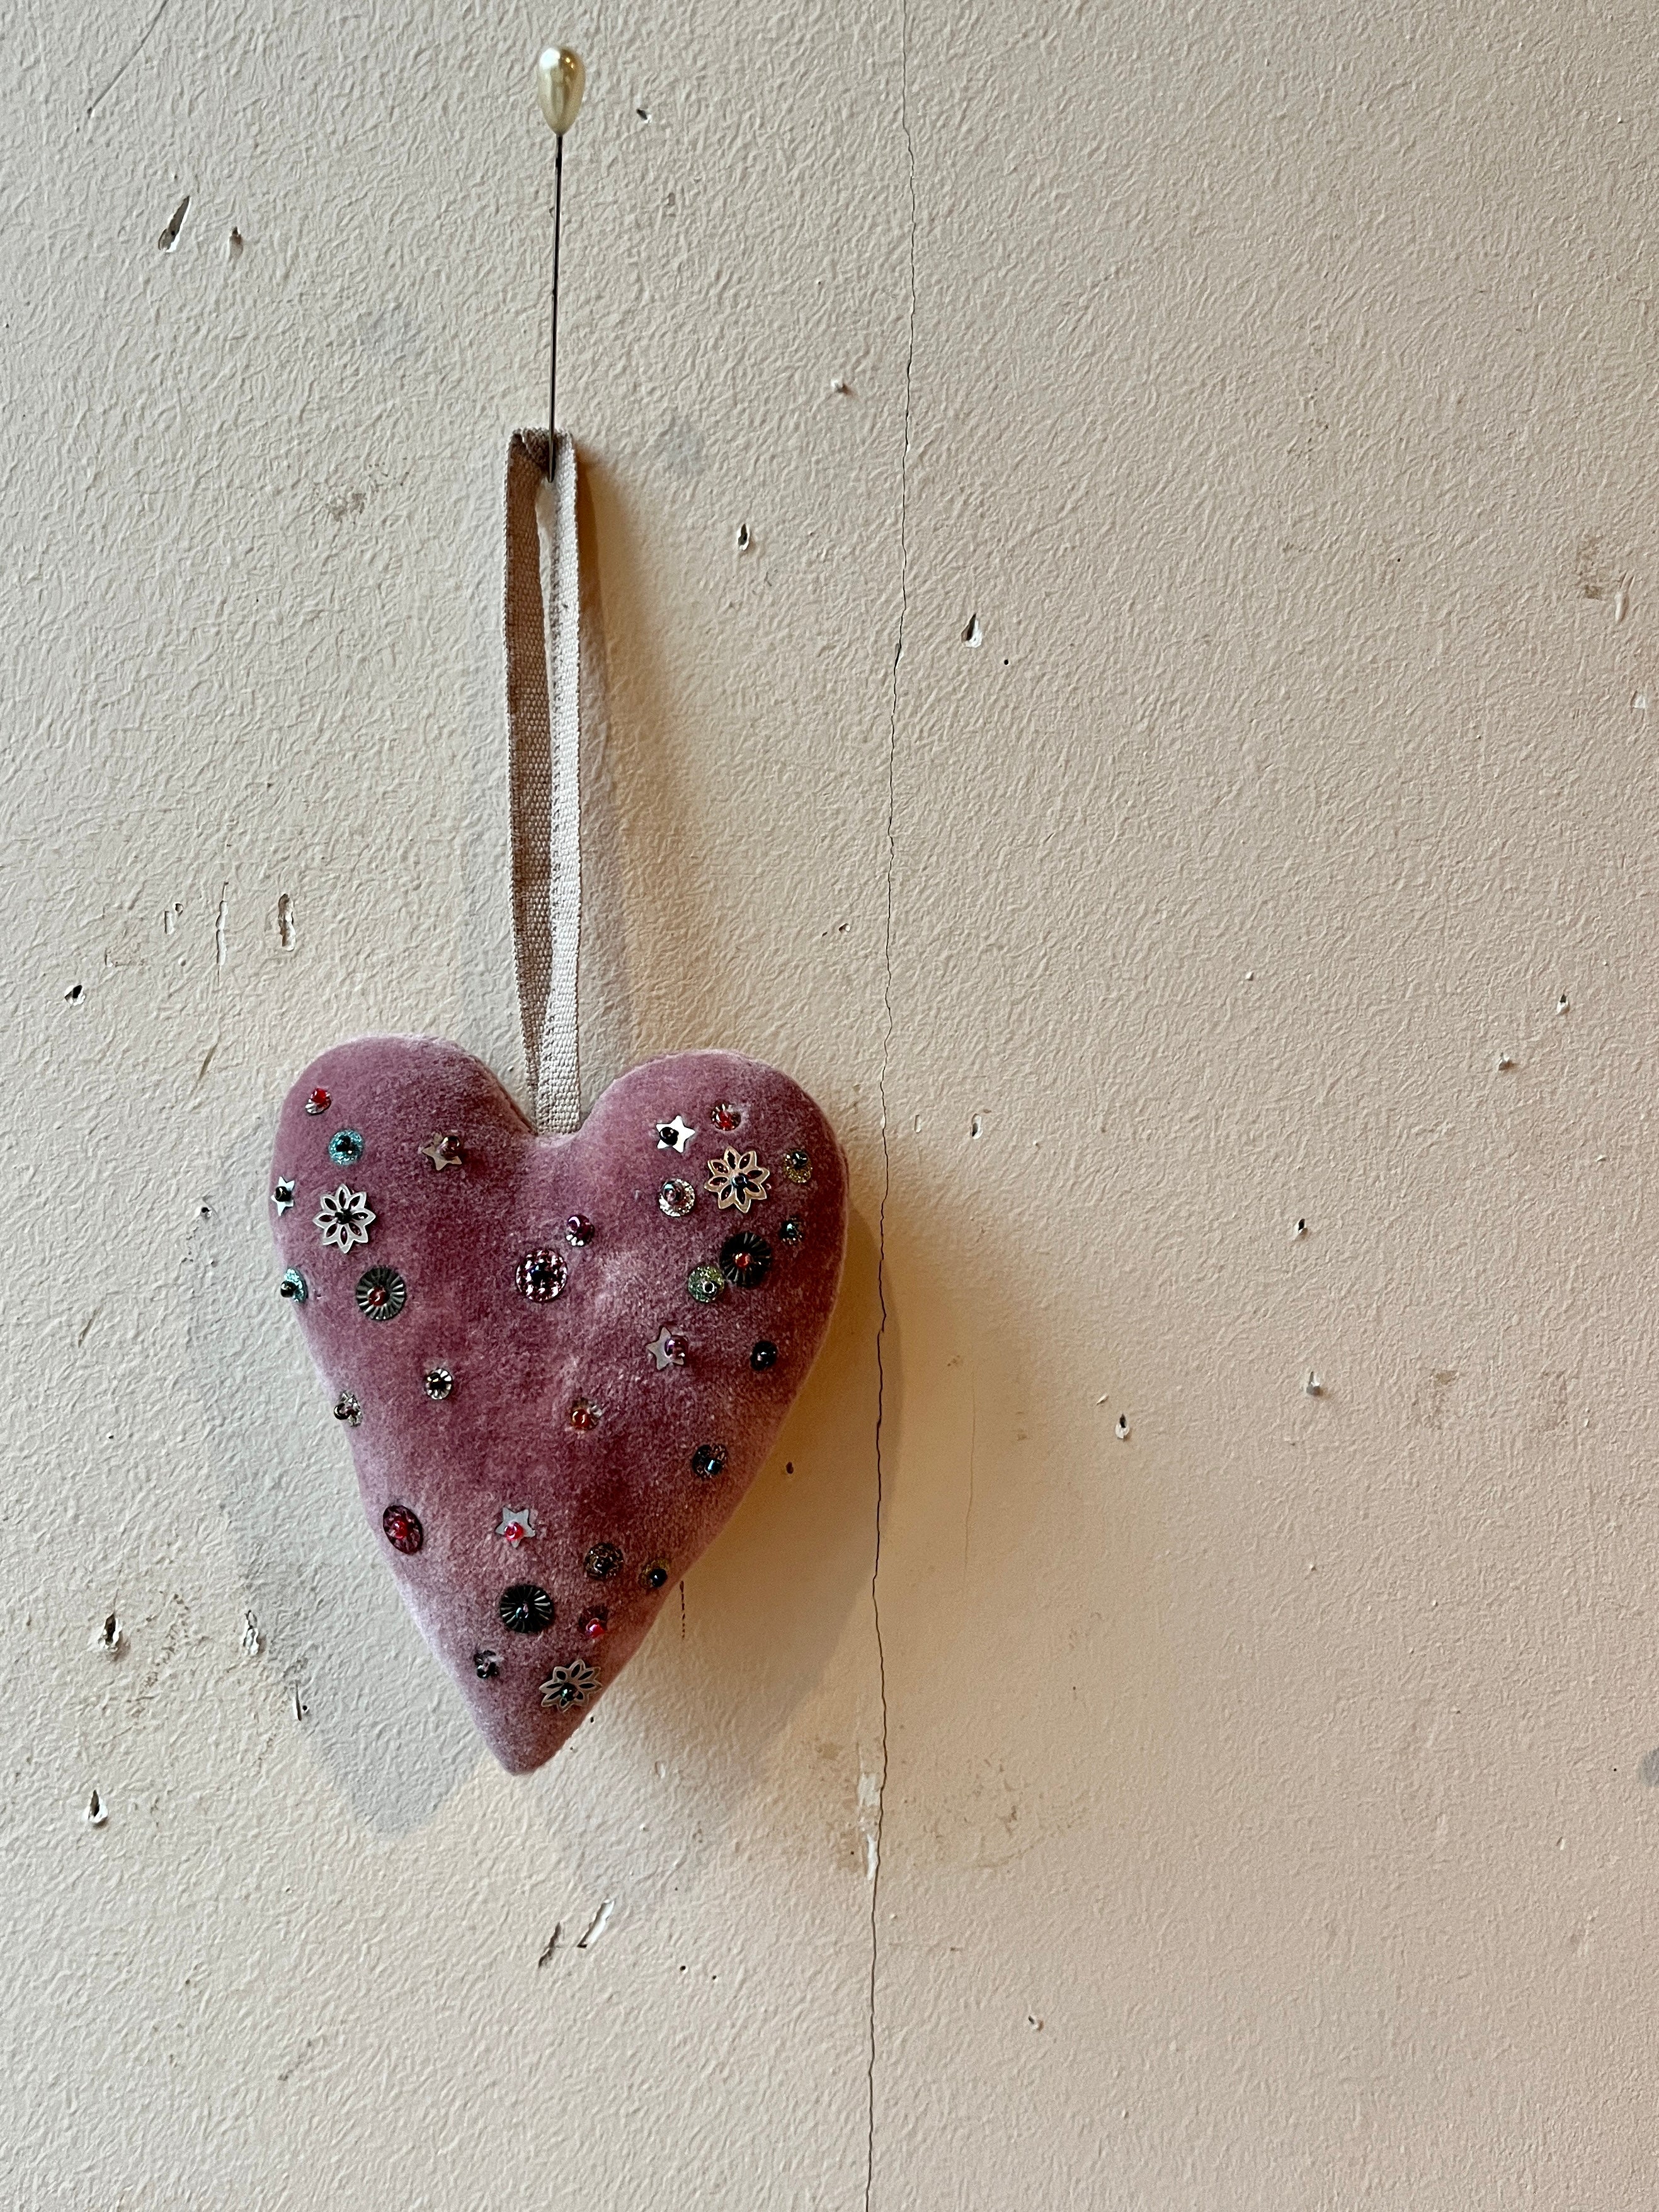 Embellished Heart Ornament by Skippy Cotton